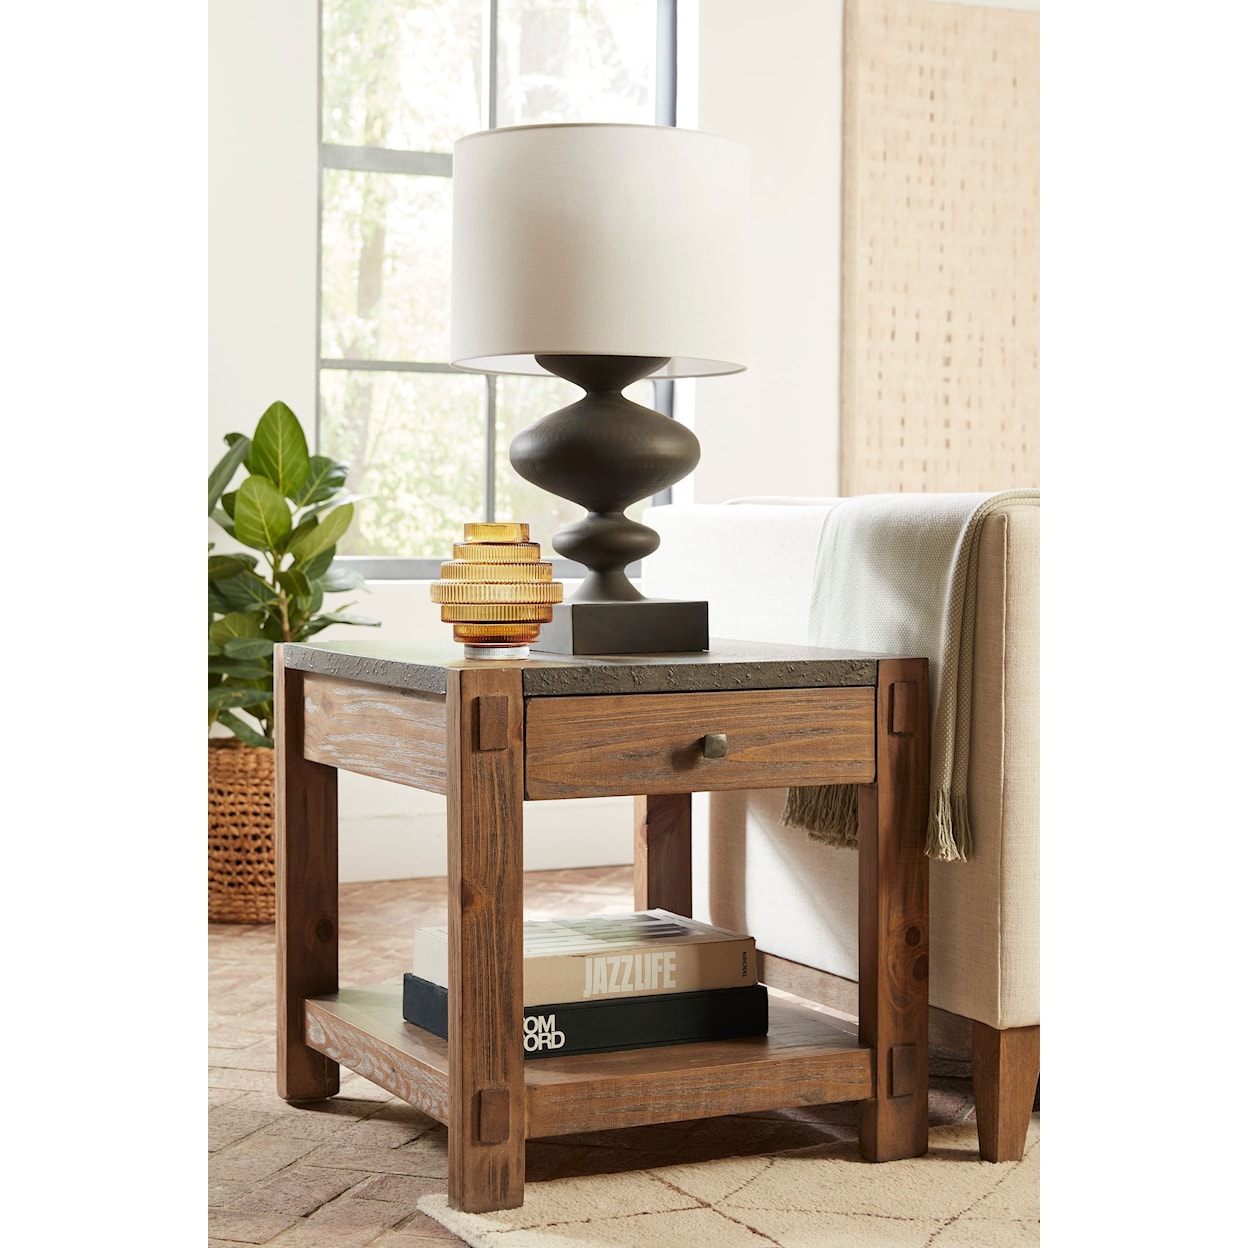 Aspenhome Harlow 1-Drawer End Table